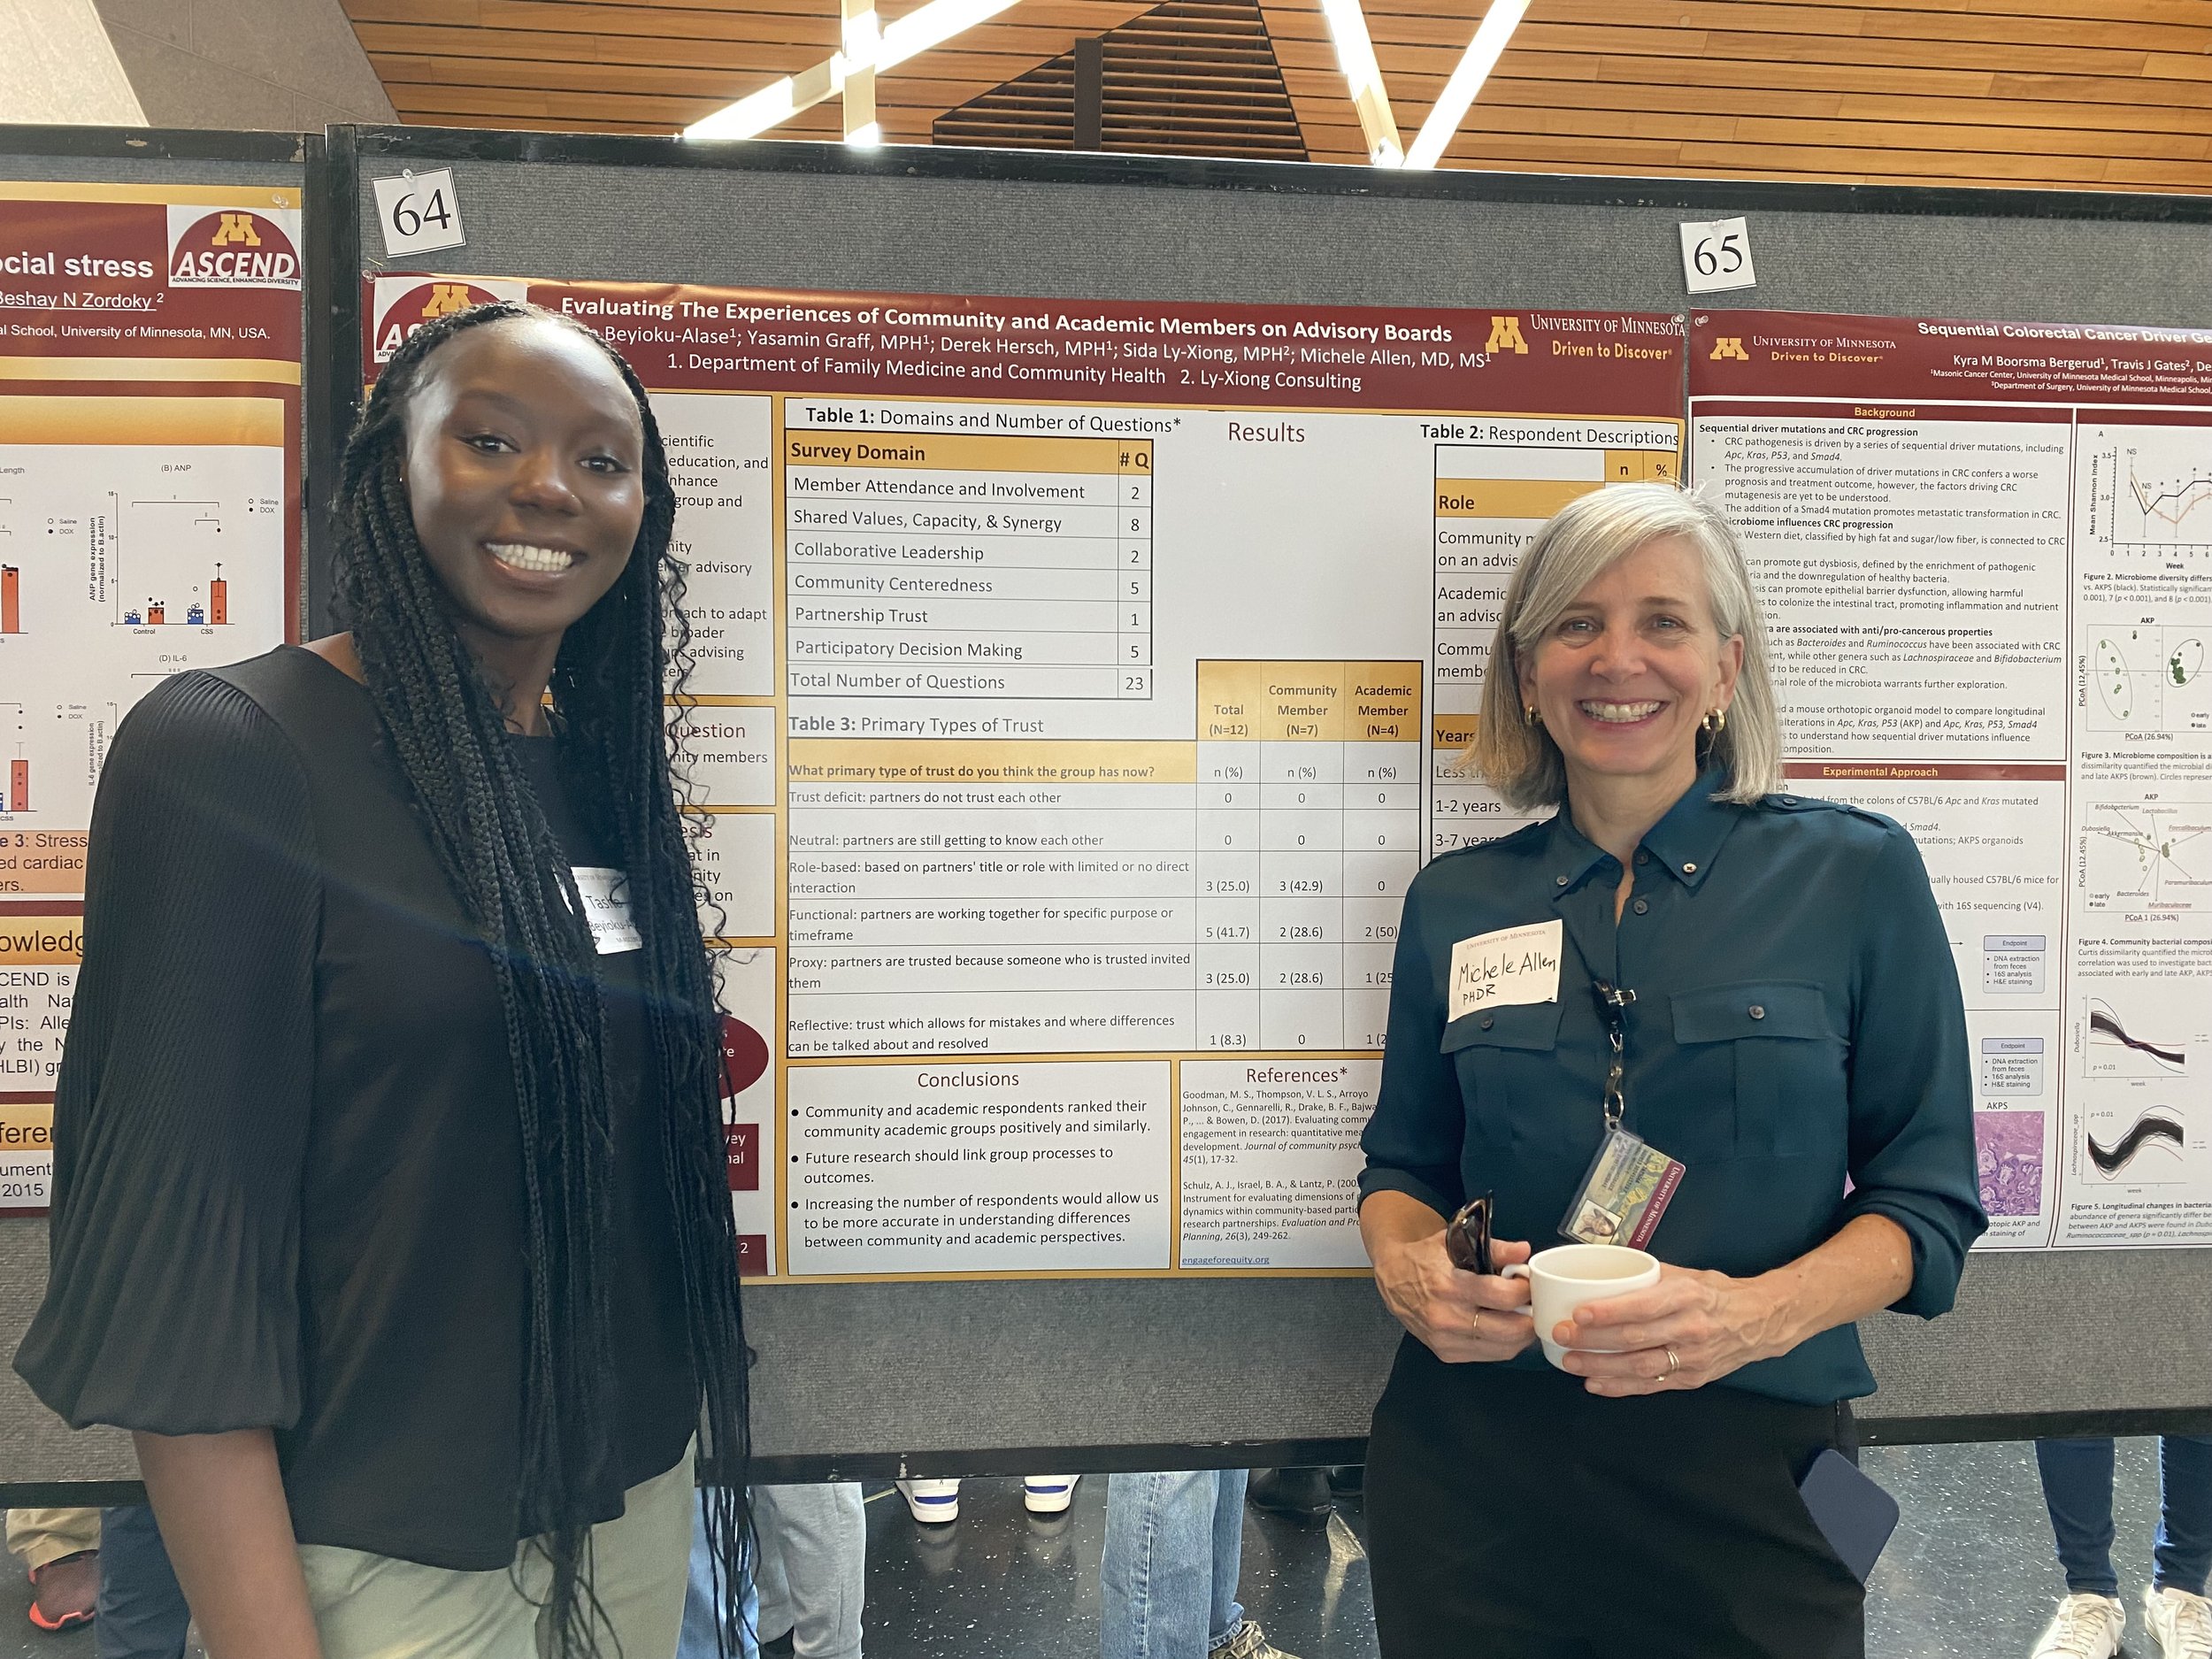  "Evaluating the Experiences of Community and Academic Members on Advisory Boards", Tasha Beyioku-Alase; Yasamin Graff, MPH; Derek Hersch, MPH; Sida Ly-Xiong, MPH; Michele Allen, MD, MS  Tasha Beyioku-Alase and her mentor Michele Allen piloted a surv